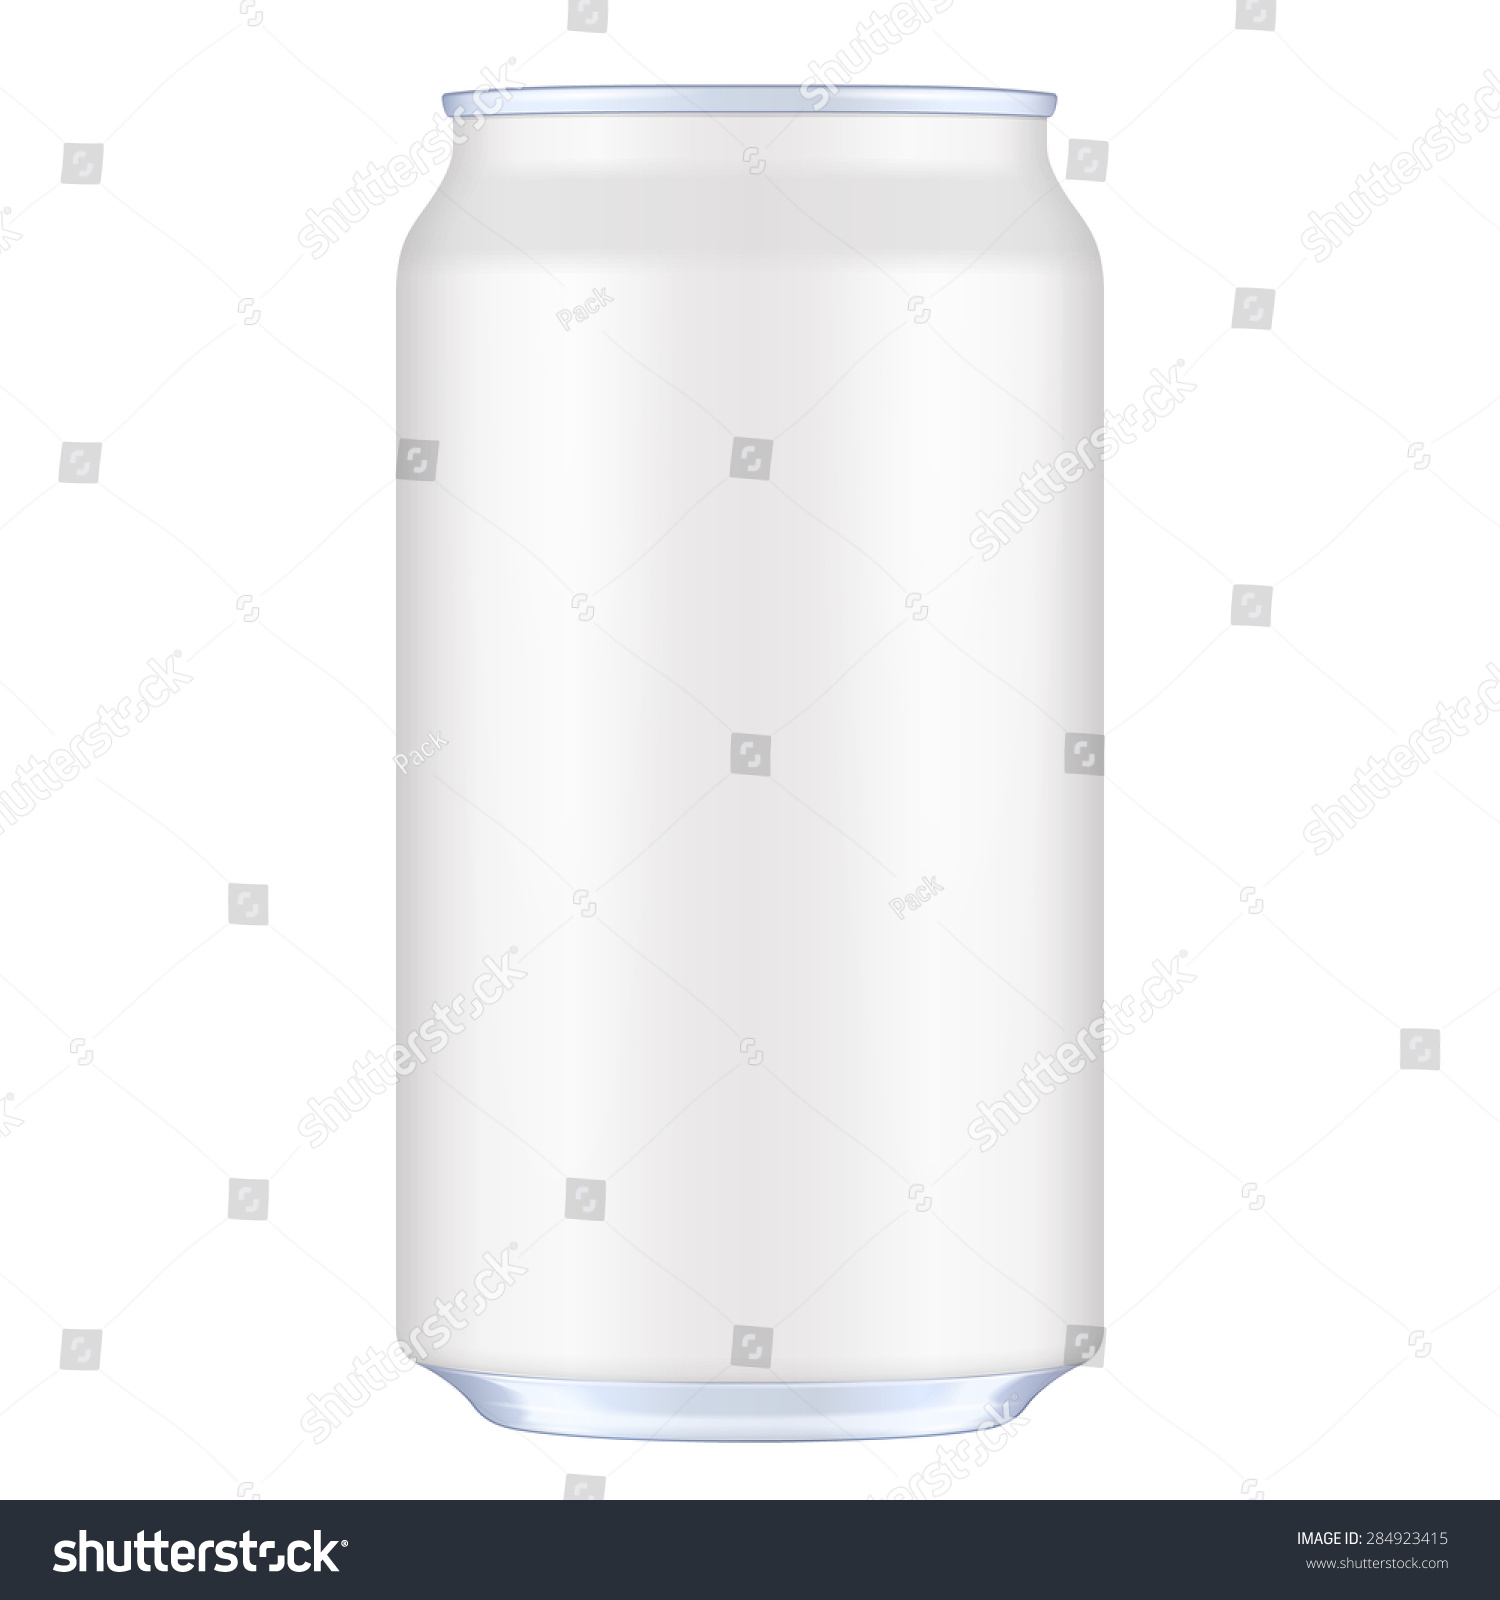 SVG of White Metal Aluminum Beverage Drink Can. Illustration Isolated. Mock Up Template Ready For Your Design. Vector EPS10 svg